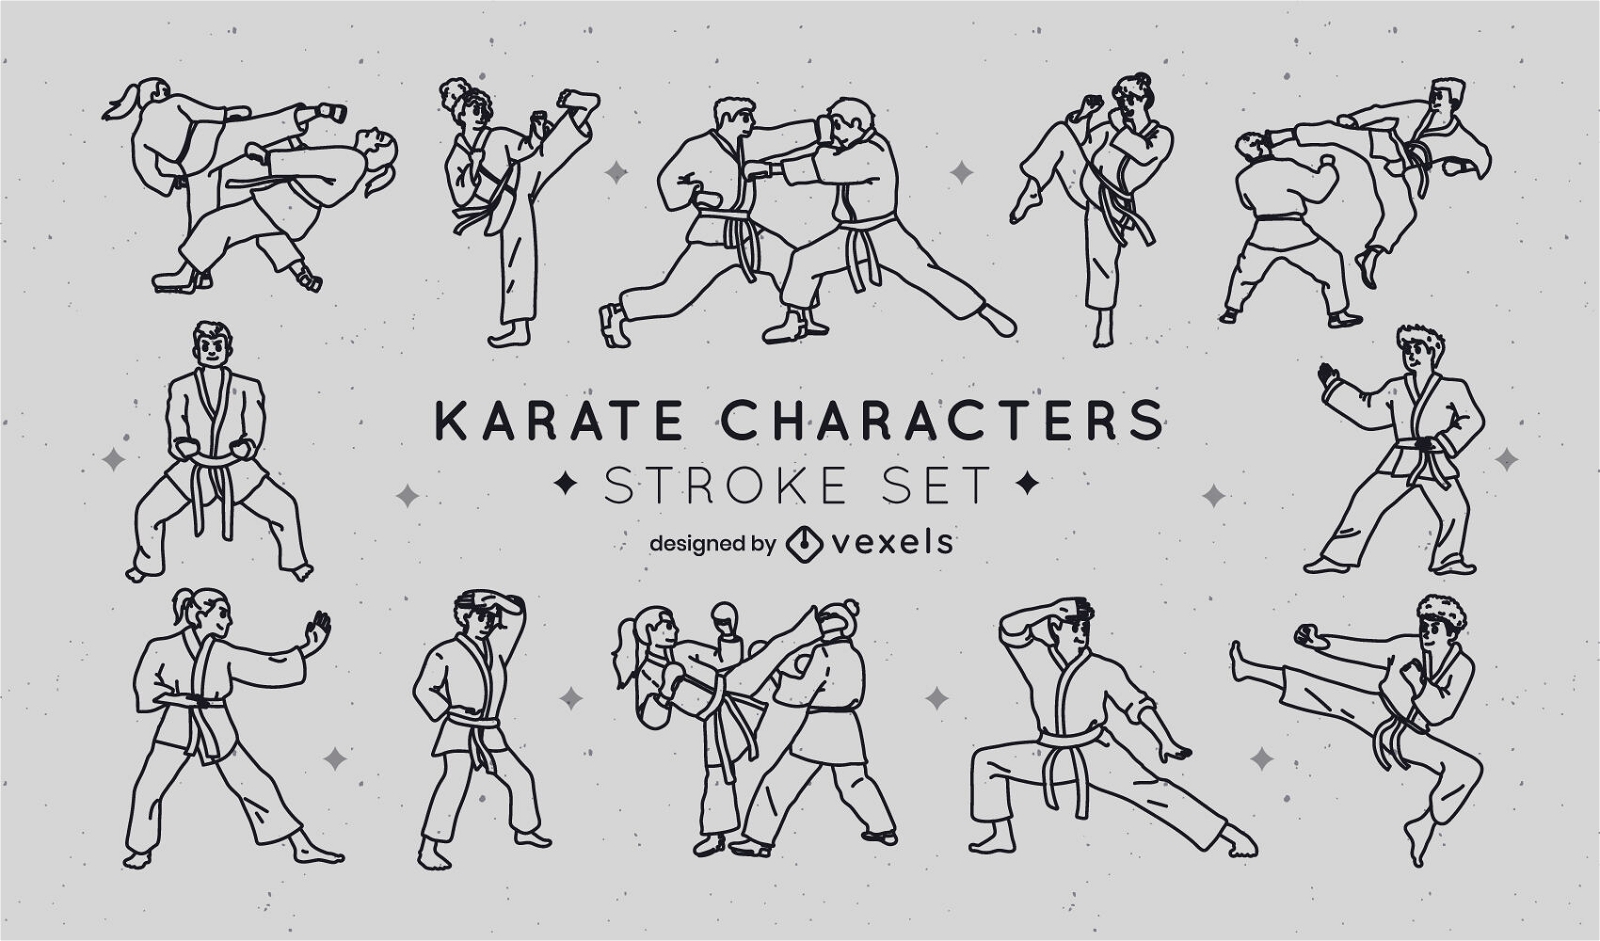 Karate characters collection stroke